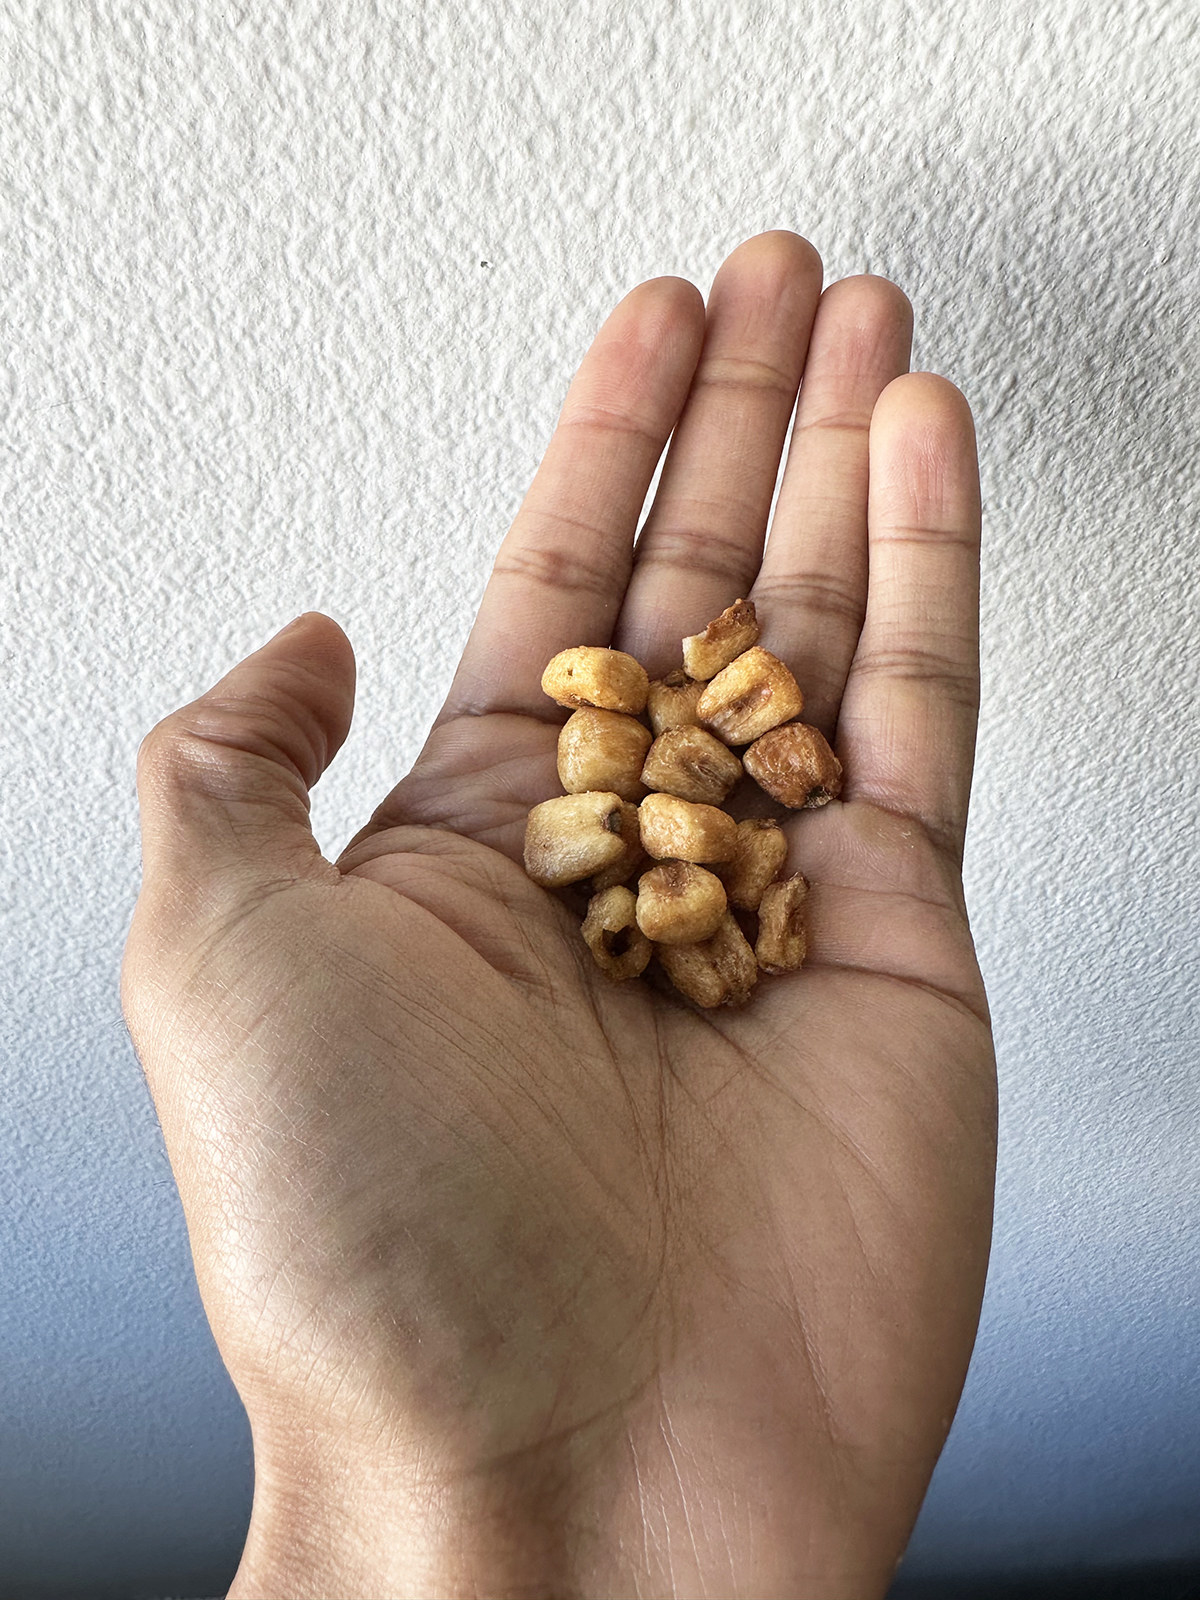 A hand holding several Corn Nuts